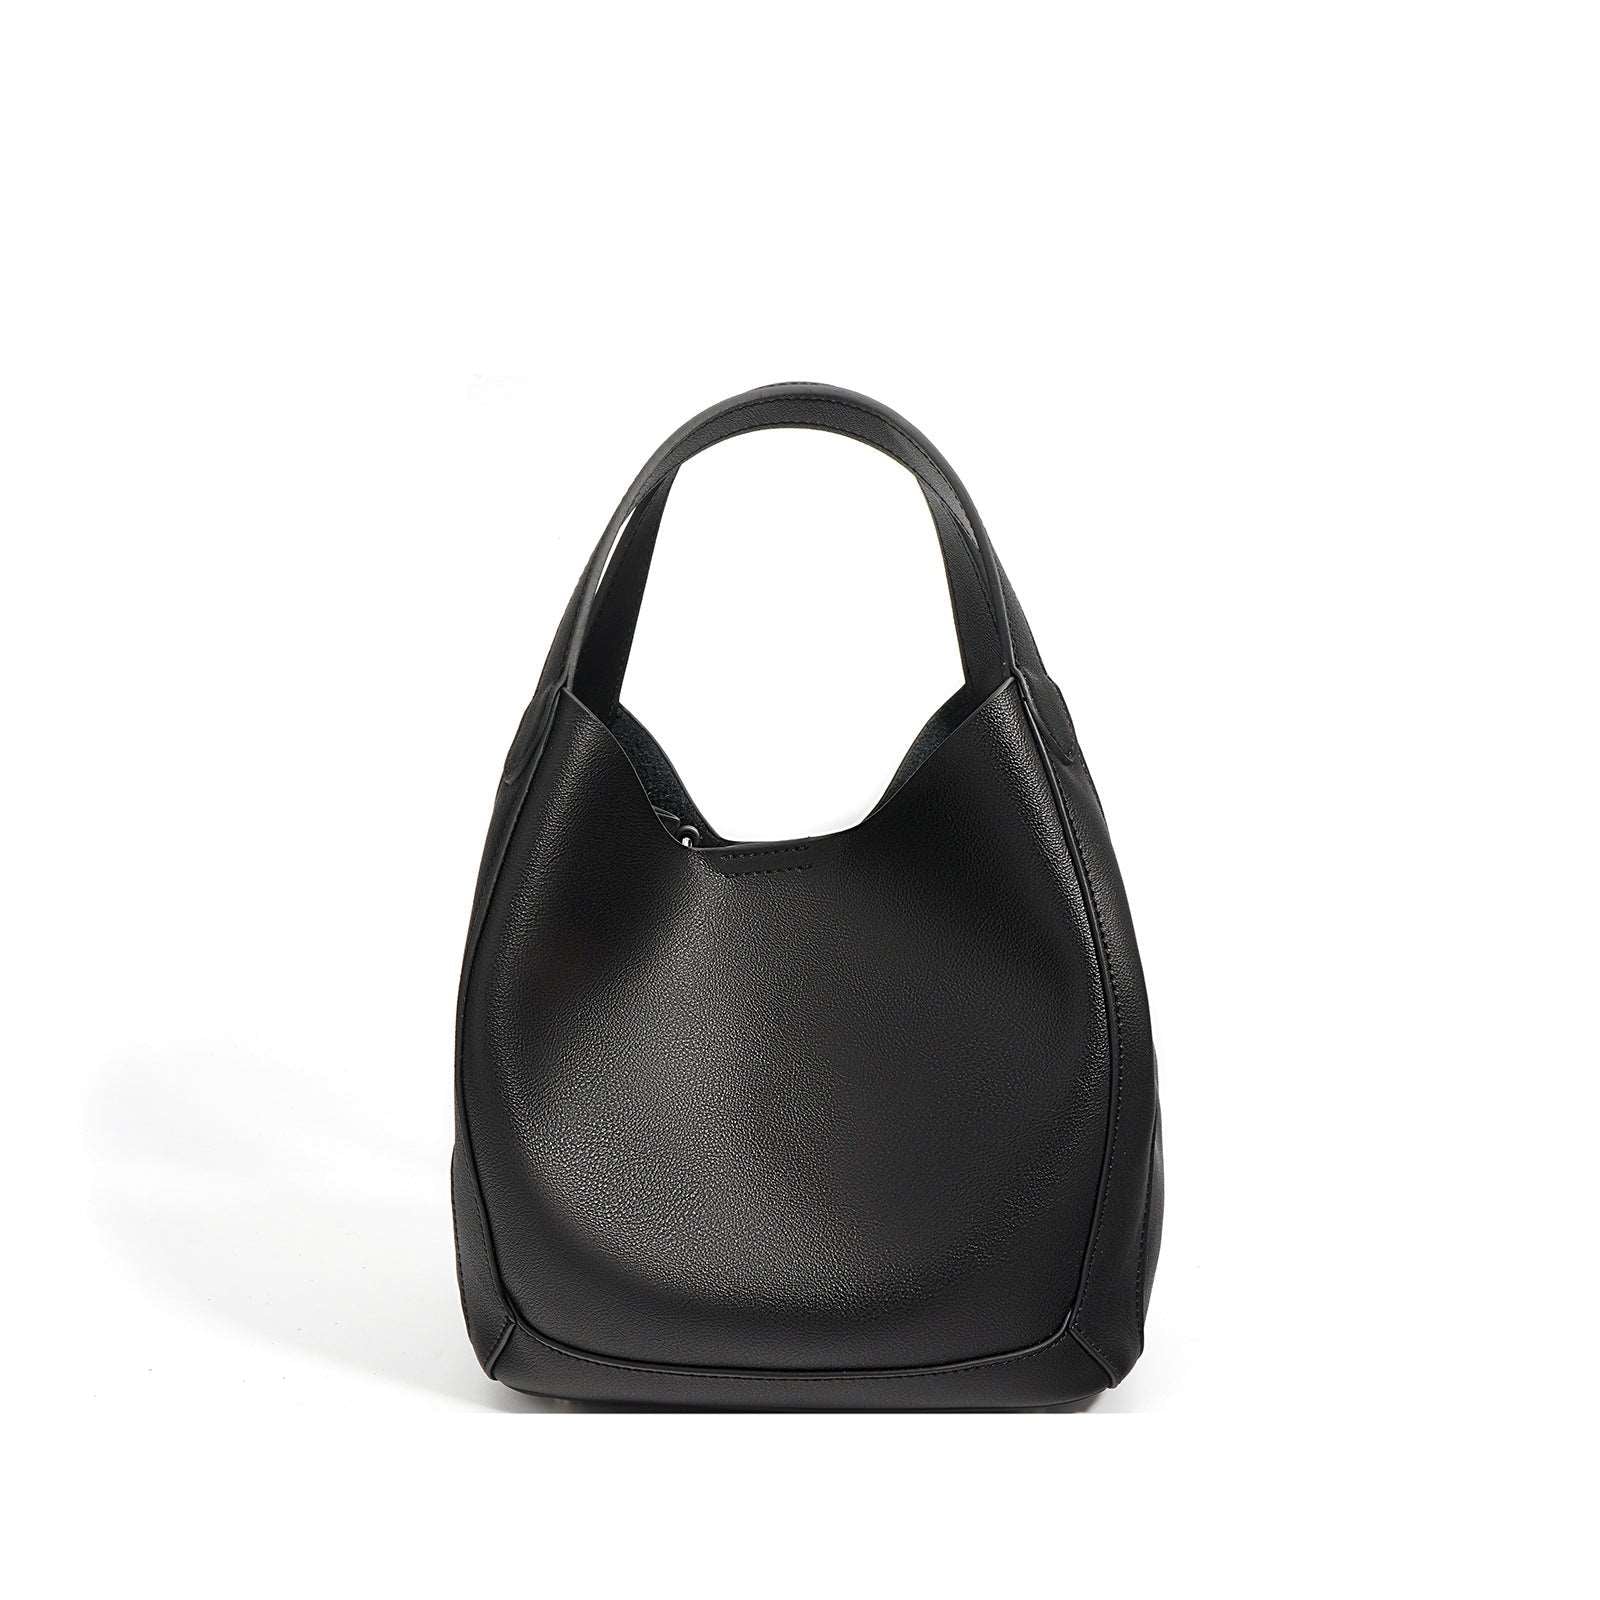 Fashionable Leather Hobo Bag with Tassel Detail for Women woyaza